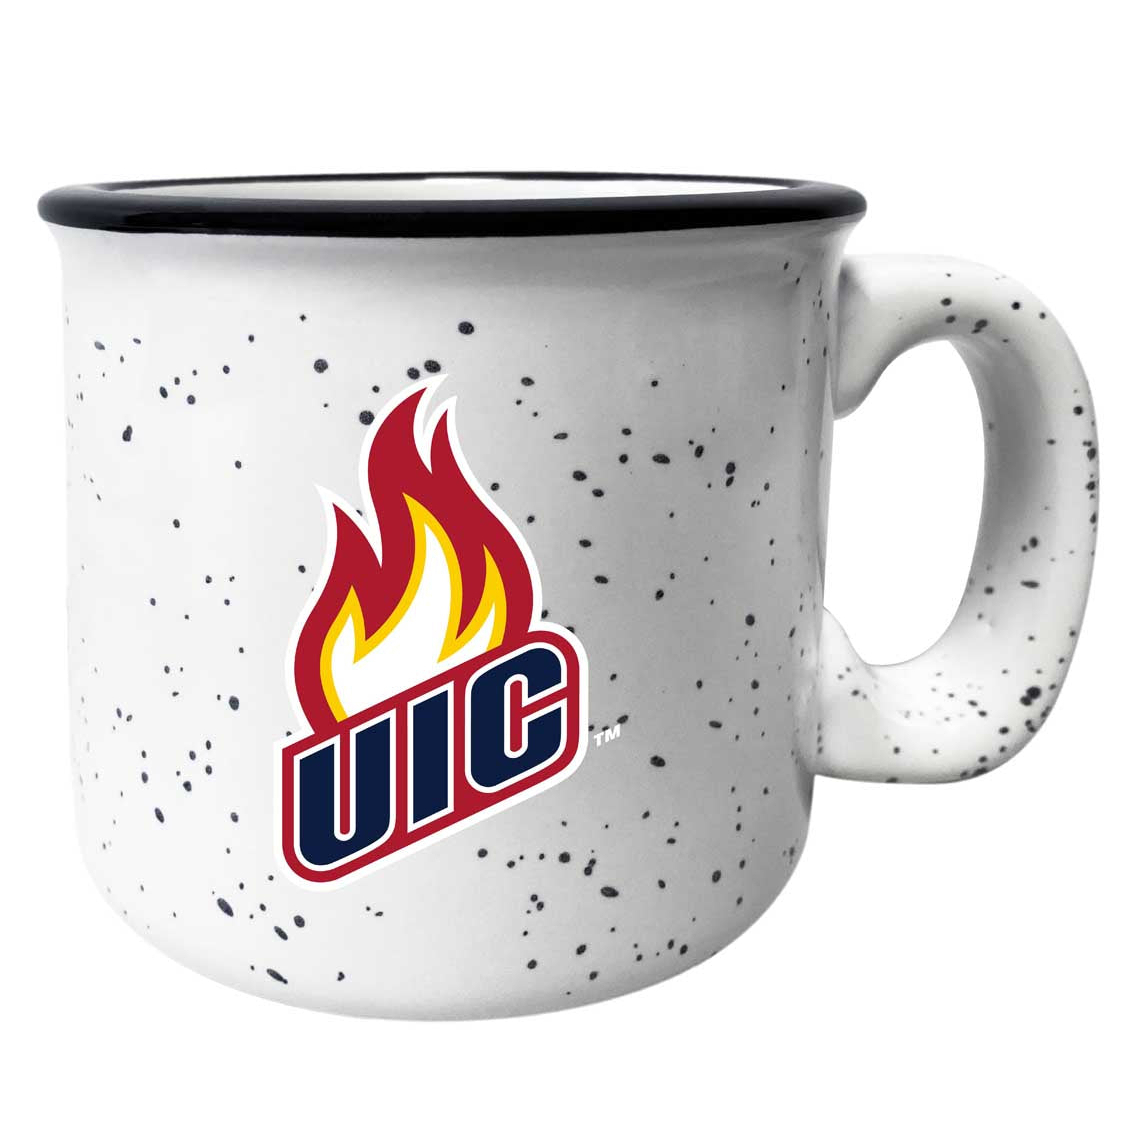 University Of Illinois At Chicago Speckled Ceramic Camper Coffee Mug - Choose Your Color - White